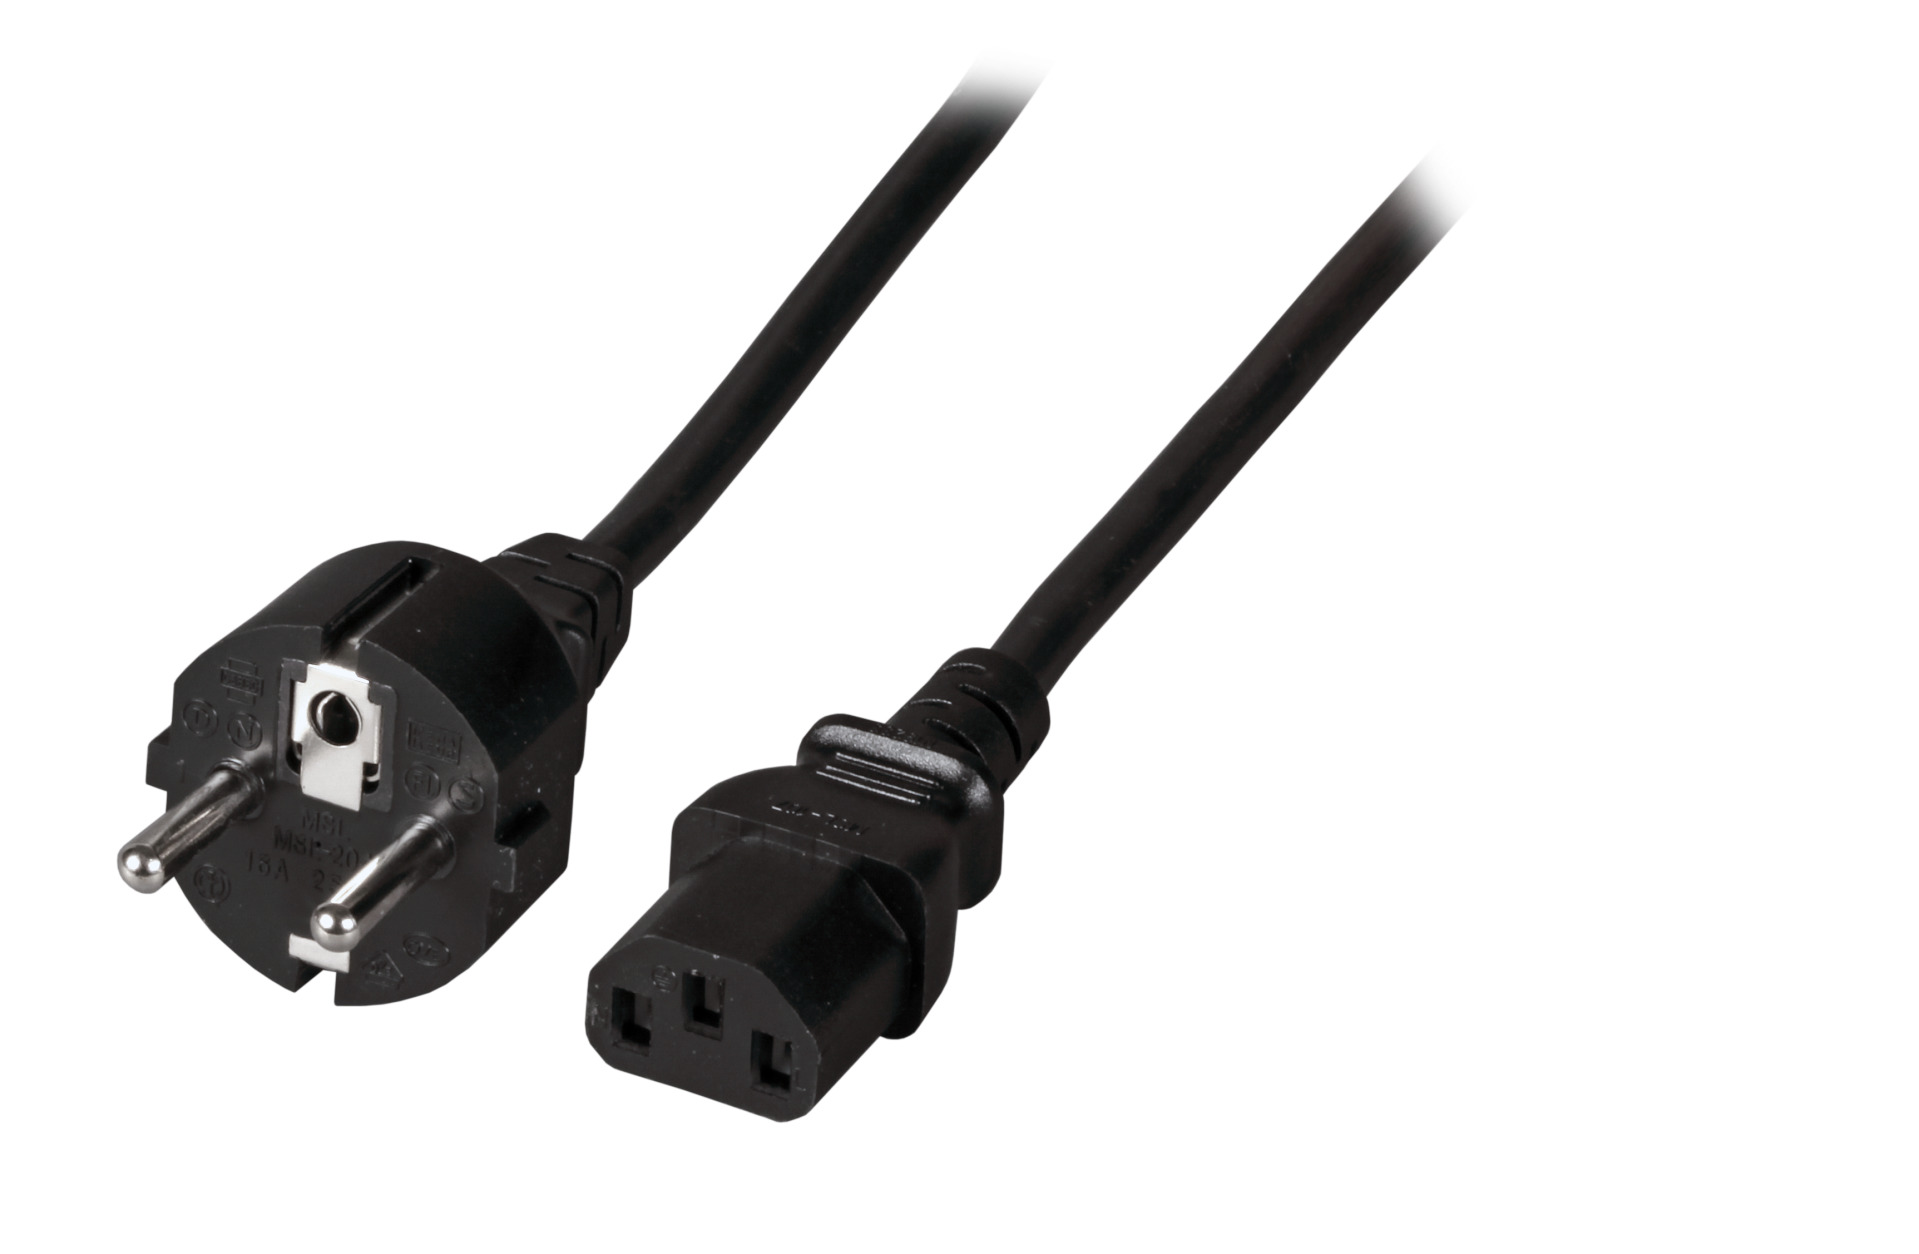 Power Cable CEE7/7 180° - C13 180°, Black, 2.0 m, 3 x 0.75 mm²